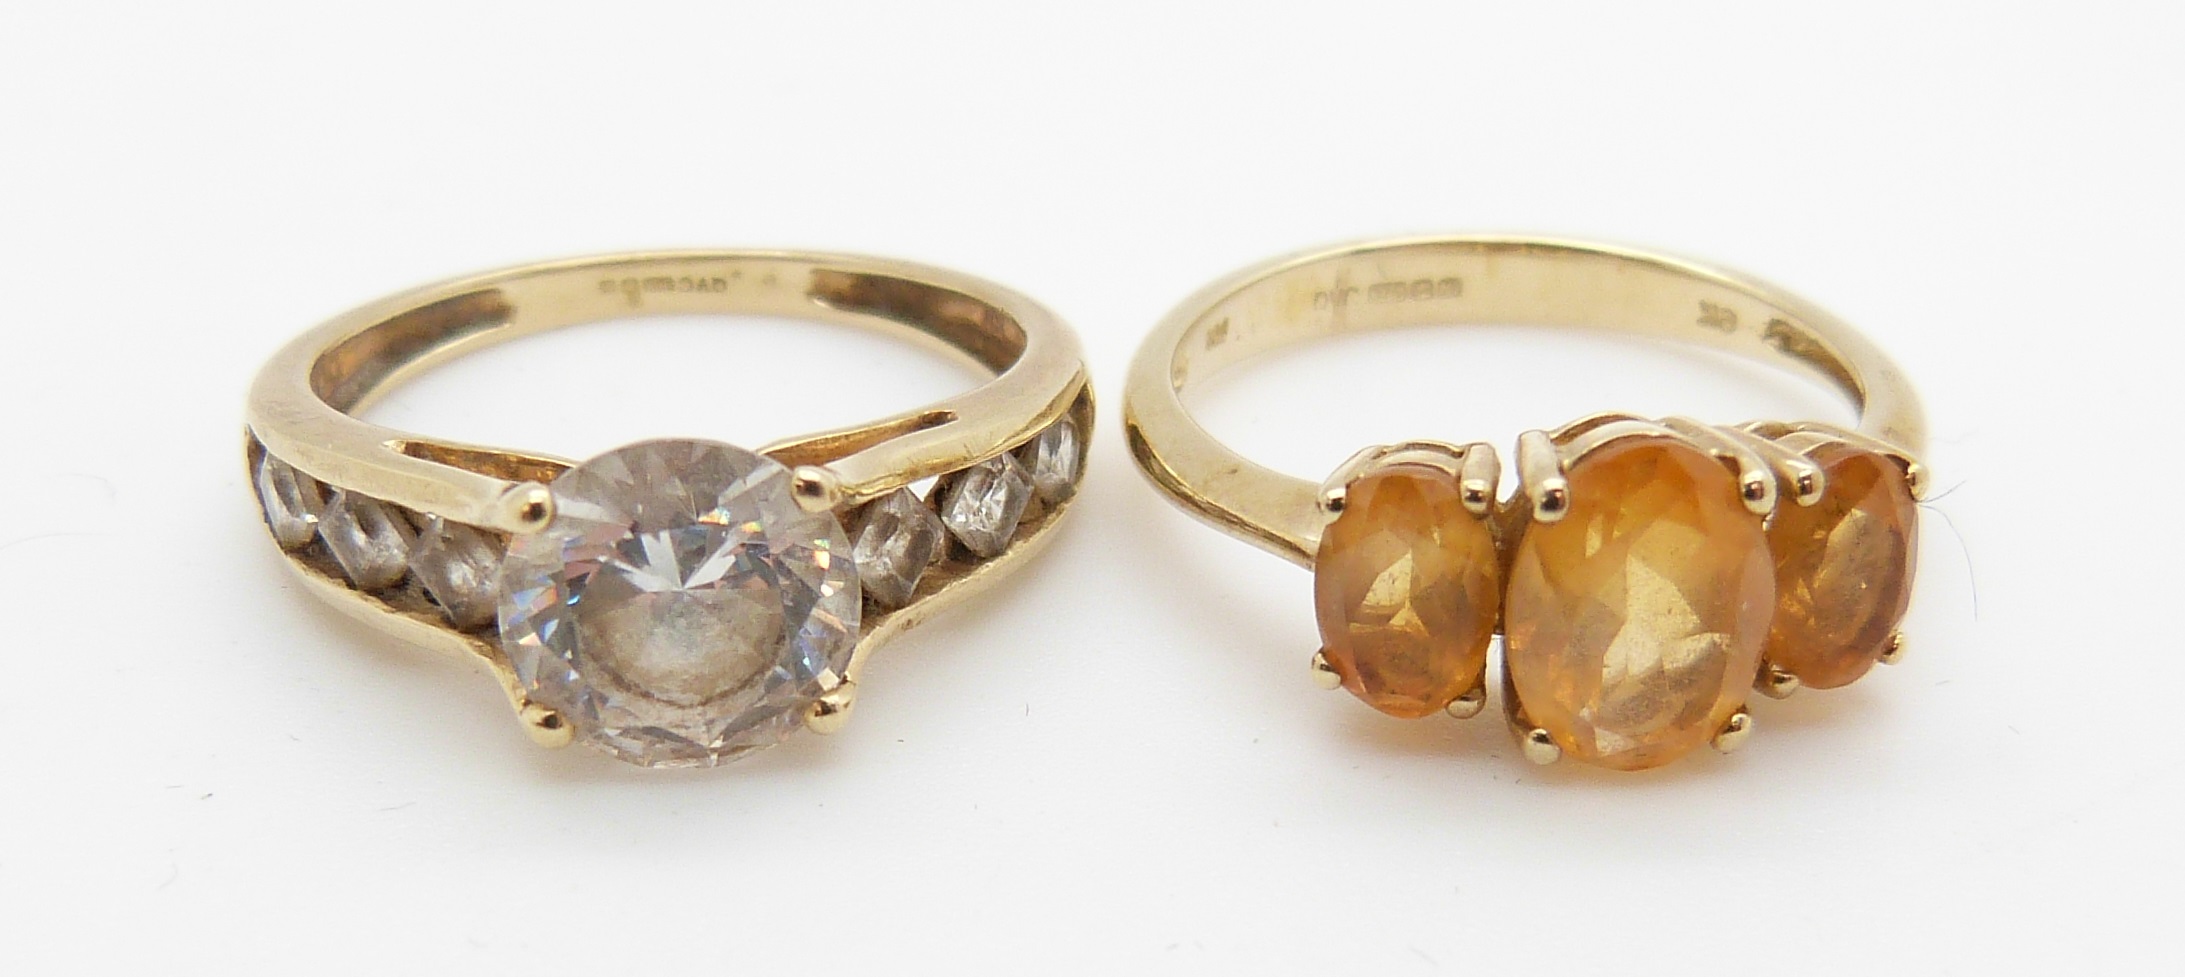 A 9ct gold ring set with topaz and a 9ct gold ring set with cubic zirconia, 5.7g